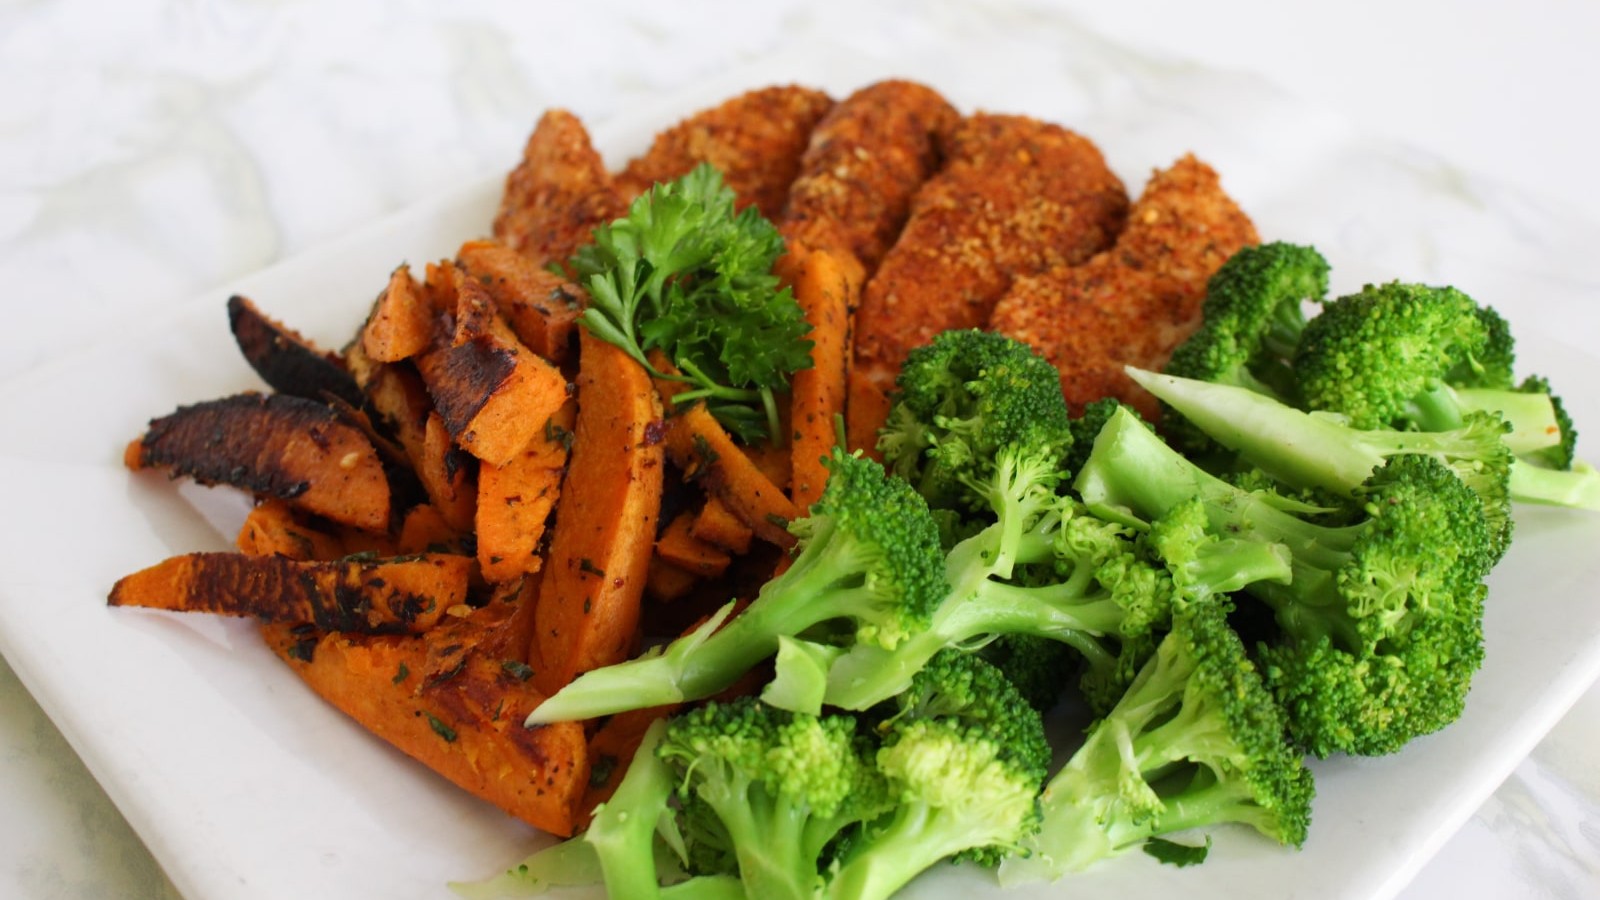 Image of Cajun Chicken with Sweet Potato Fries and Steamed Broccoli